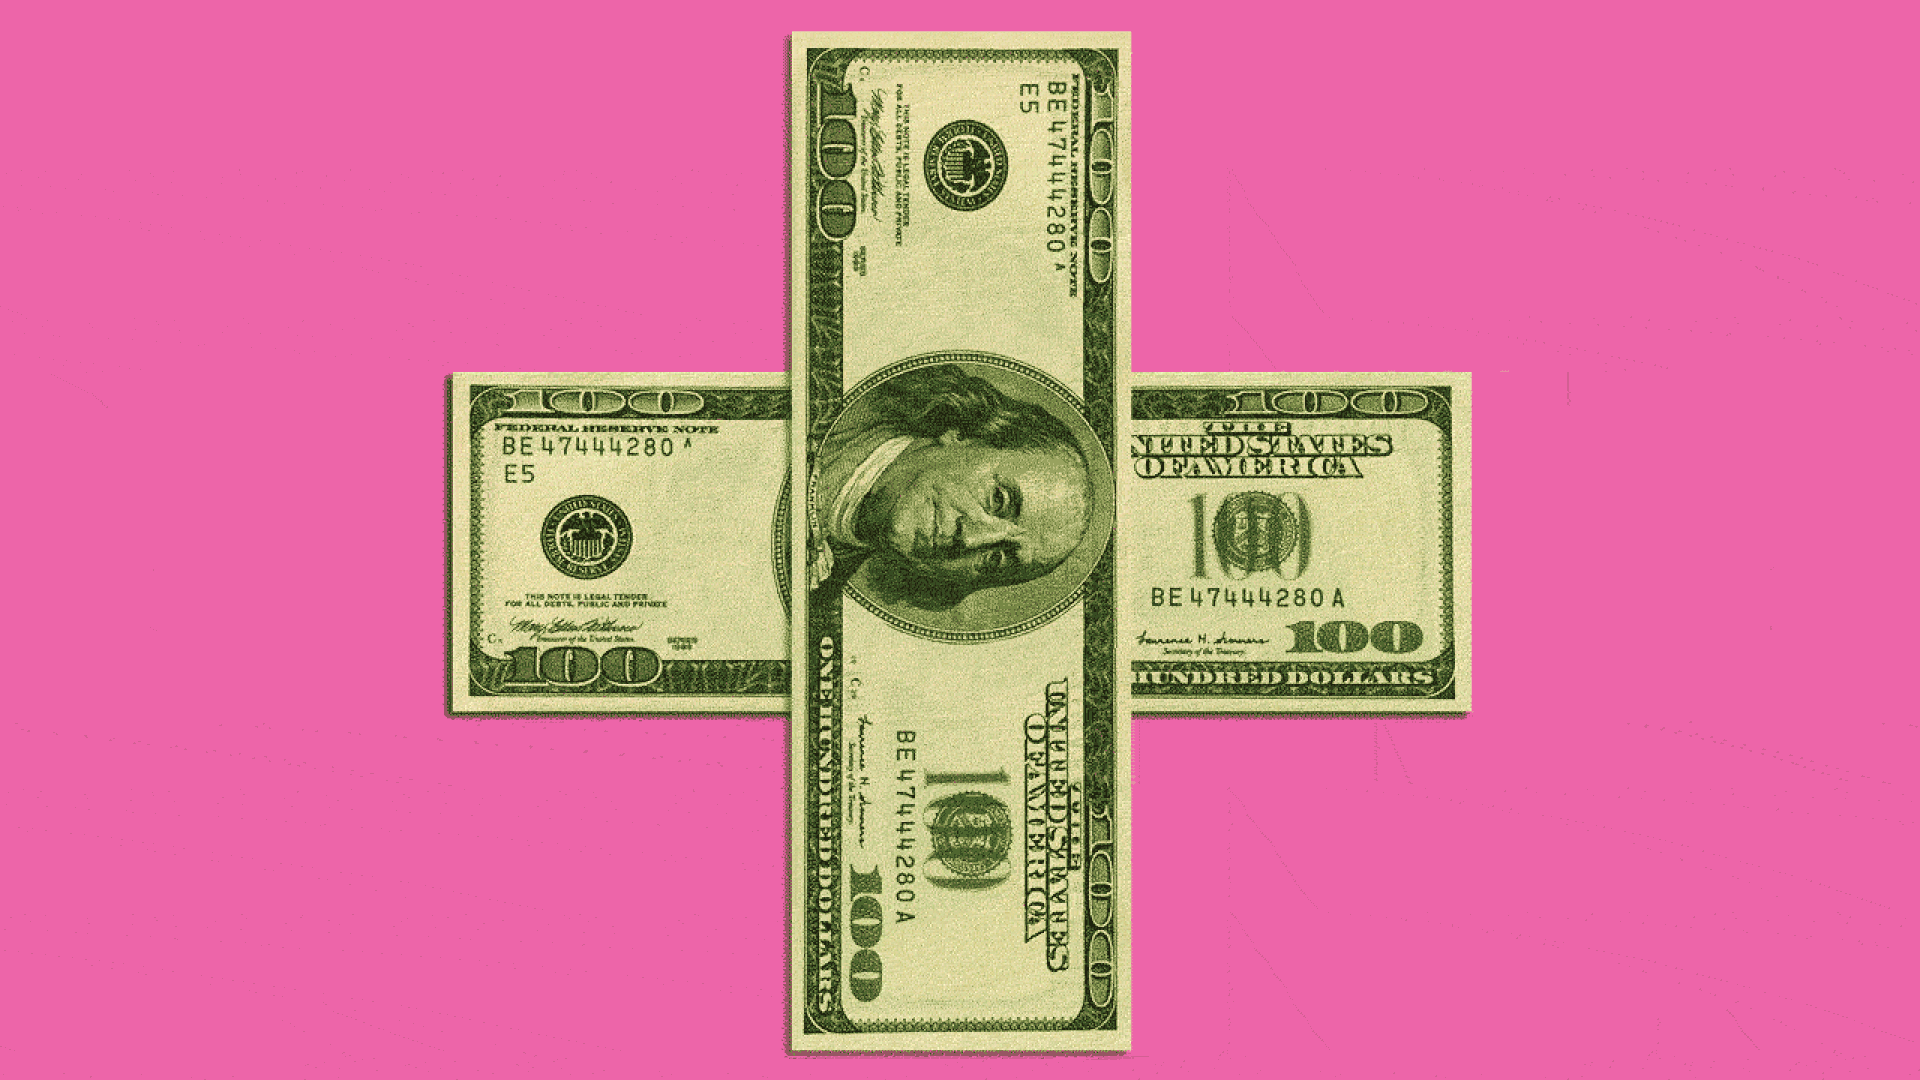 Animated illustration of a plus sign formed by two one hundred dollar bills turning into an asterisk